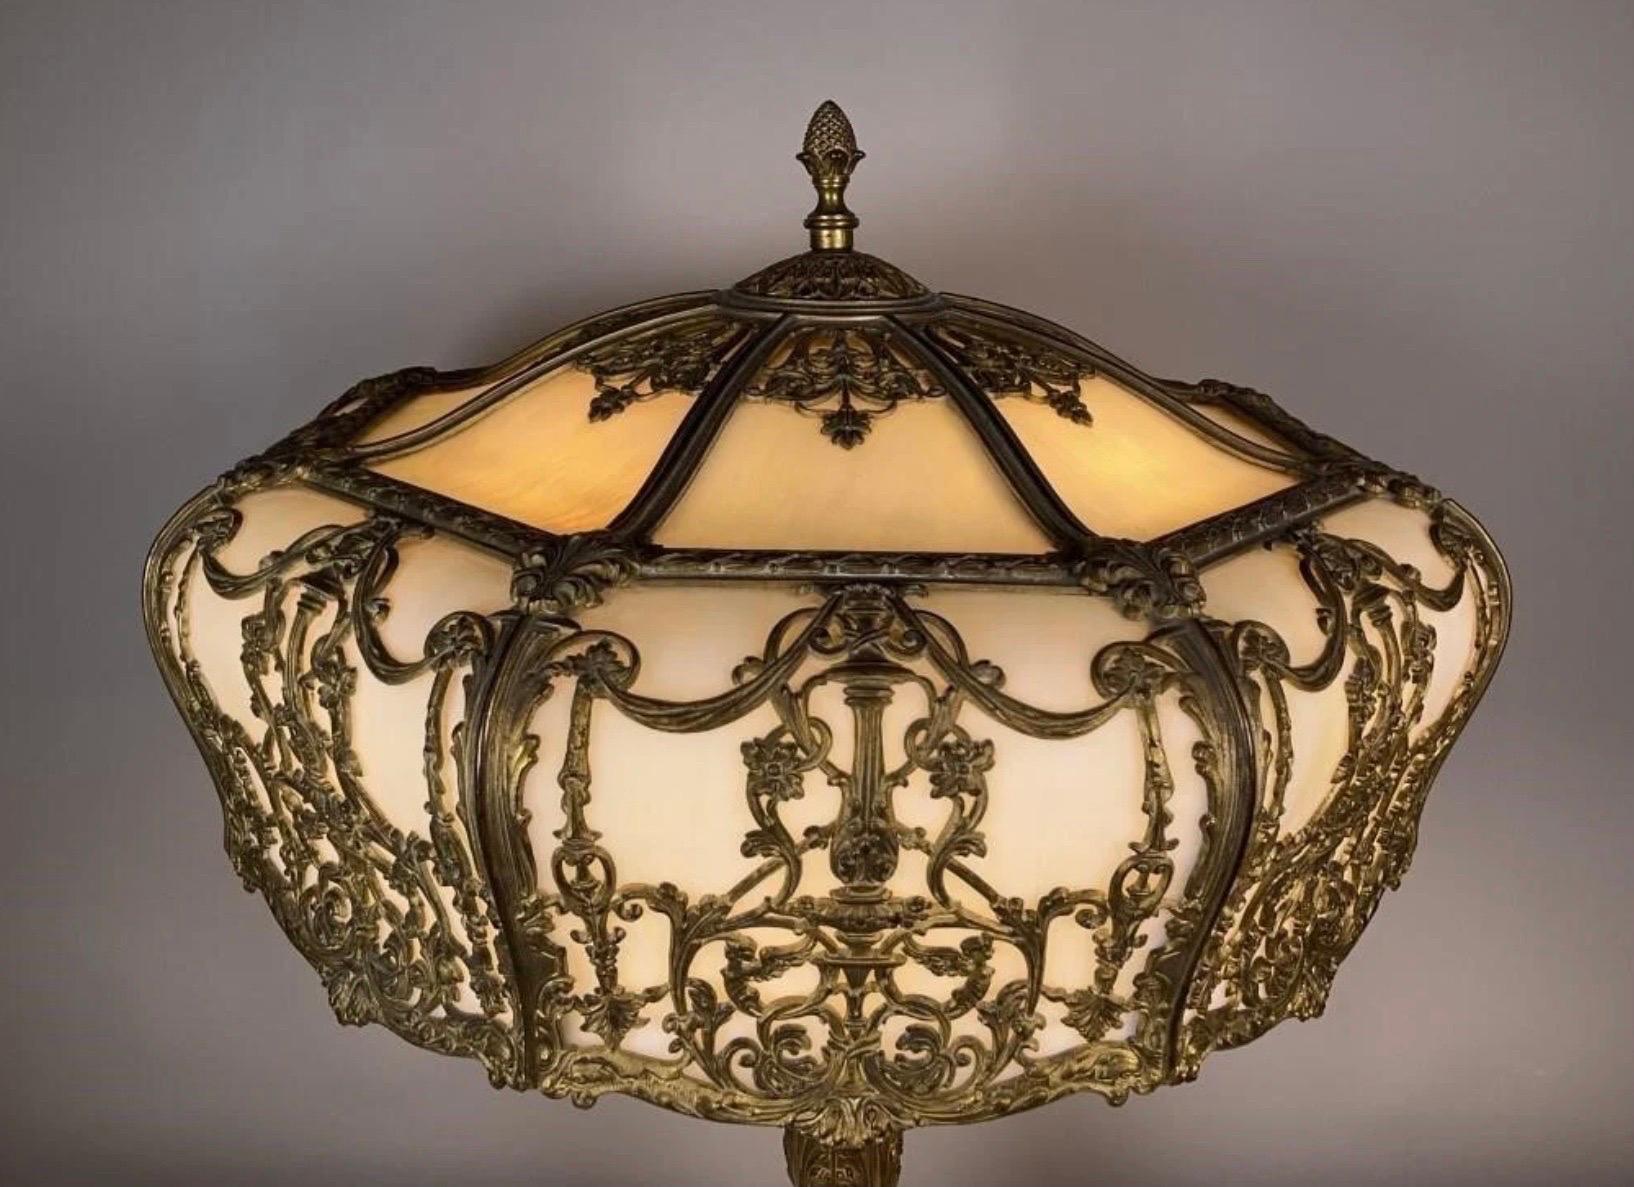 A large gilt bronze and bent glass table lamp, 24 inch diameter shade with original matching base. The glass is a pearly white with a bronze frame and base. Exceptional Quality, either Bradly and Hubbard or E.F. Caldwell. Rewired with 2 new sockets.